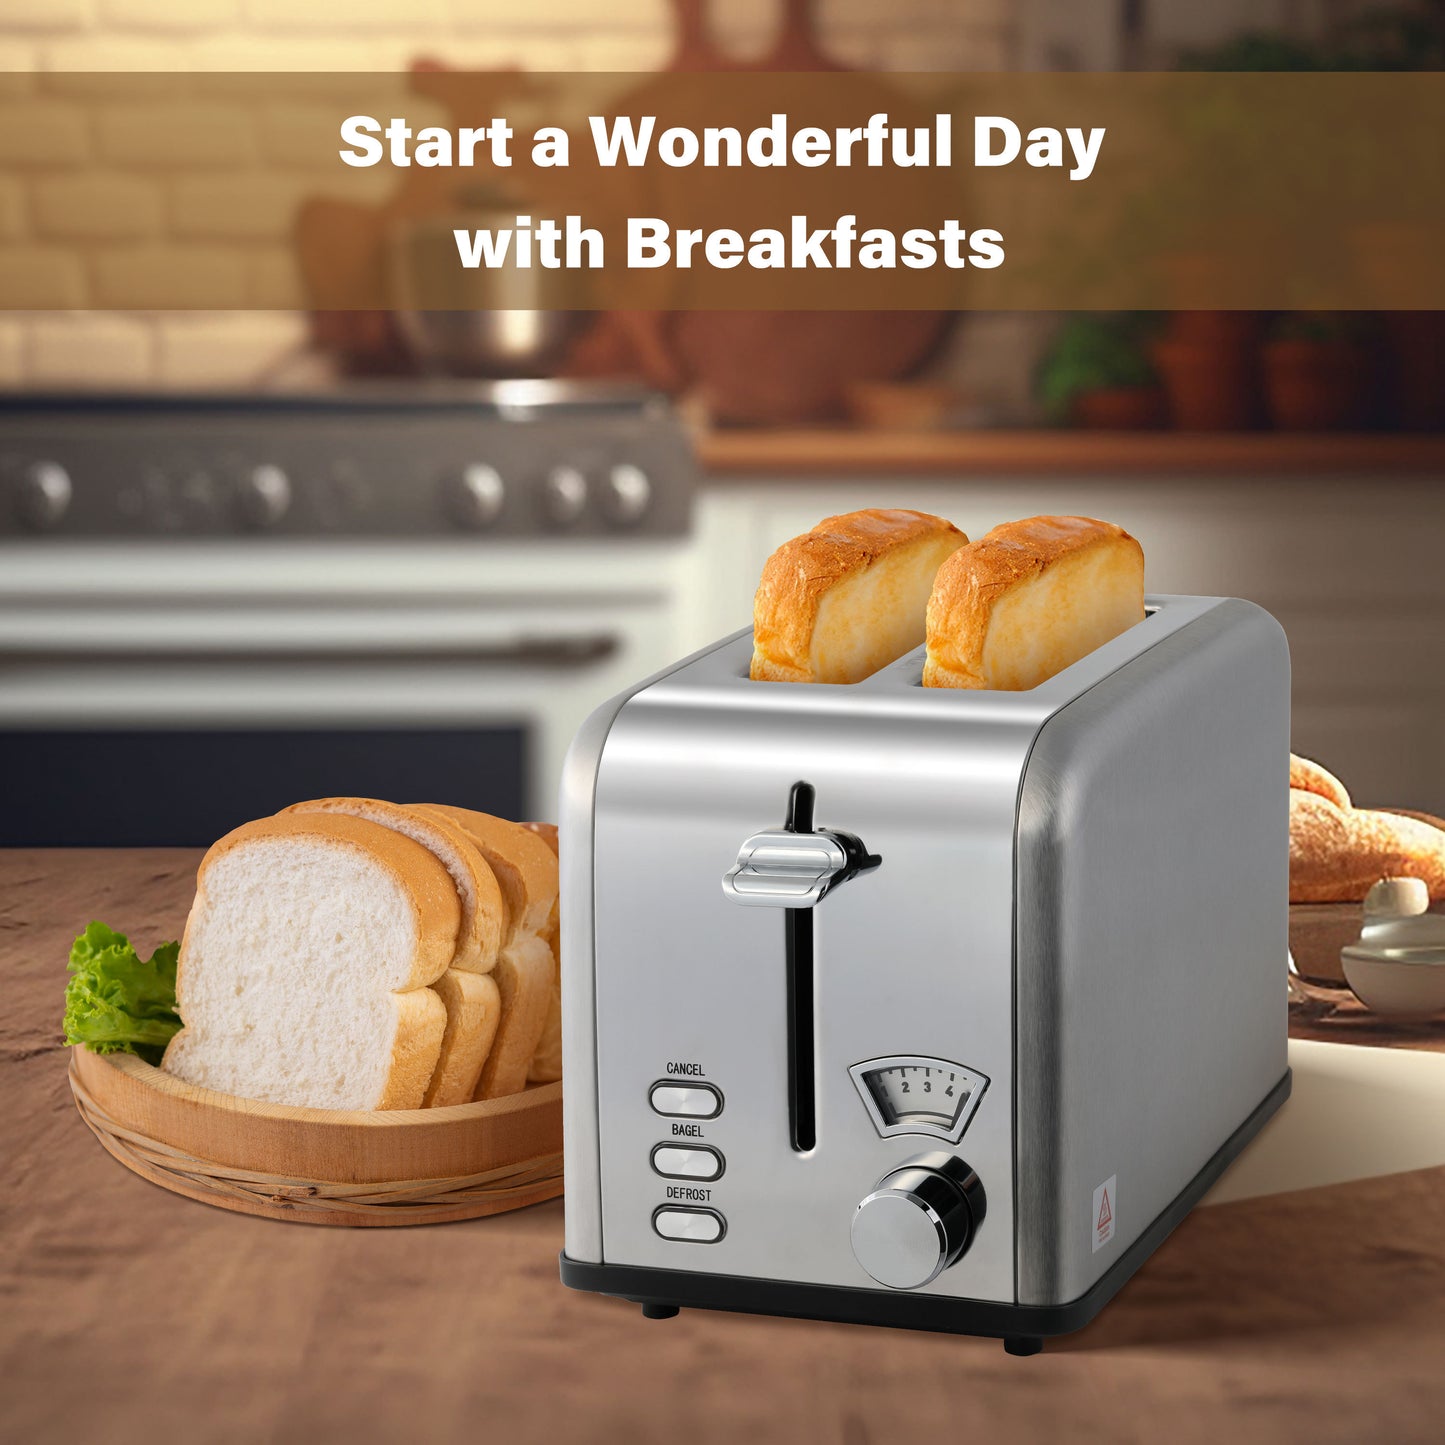 2-Slice Toaster with 1.5 inch Wide Slot, 5 Browning Setting and 3 Function: Bagel, Defrost & Cancel, Retro Stainless-Steel Style, Toast Bread Machine MLNshops